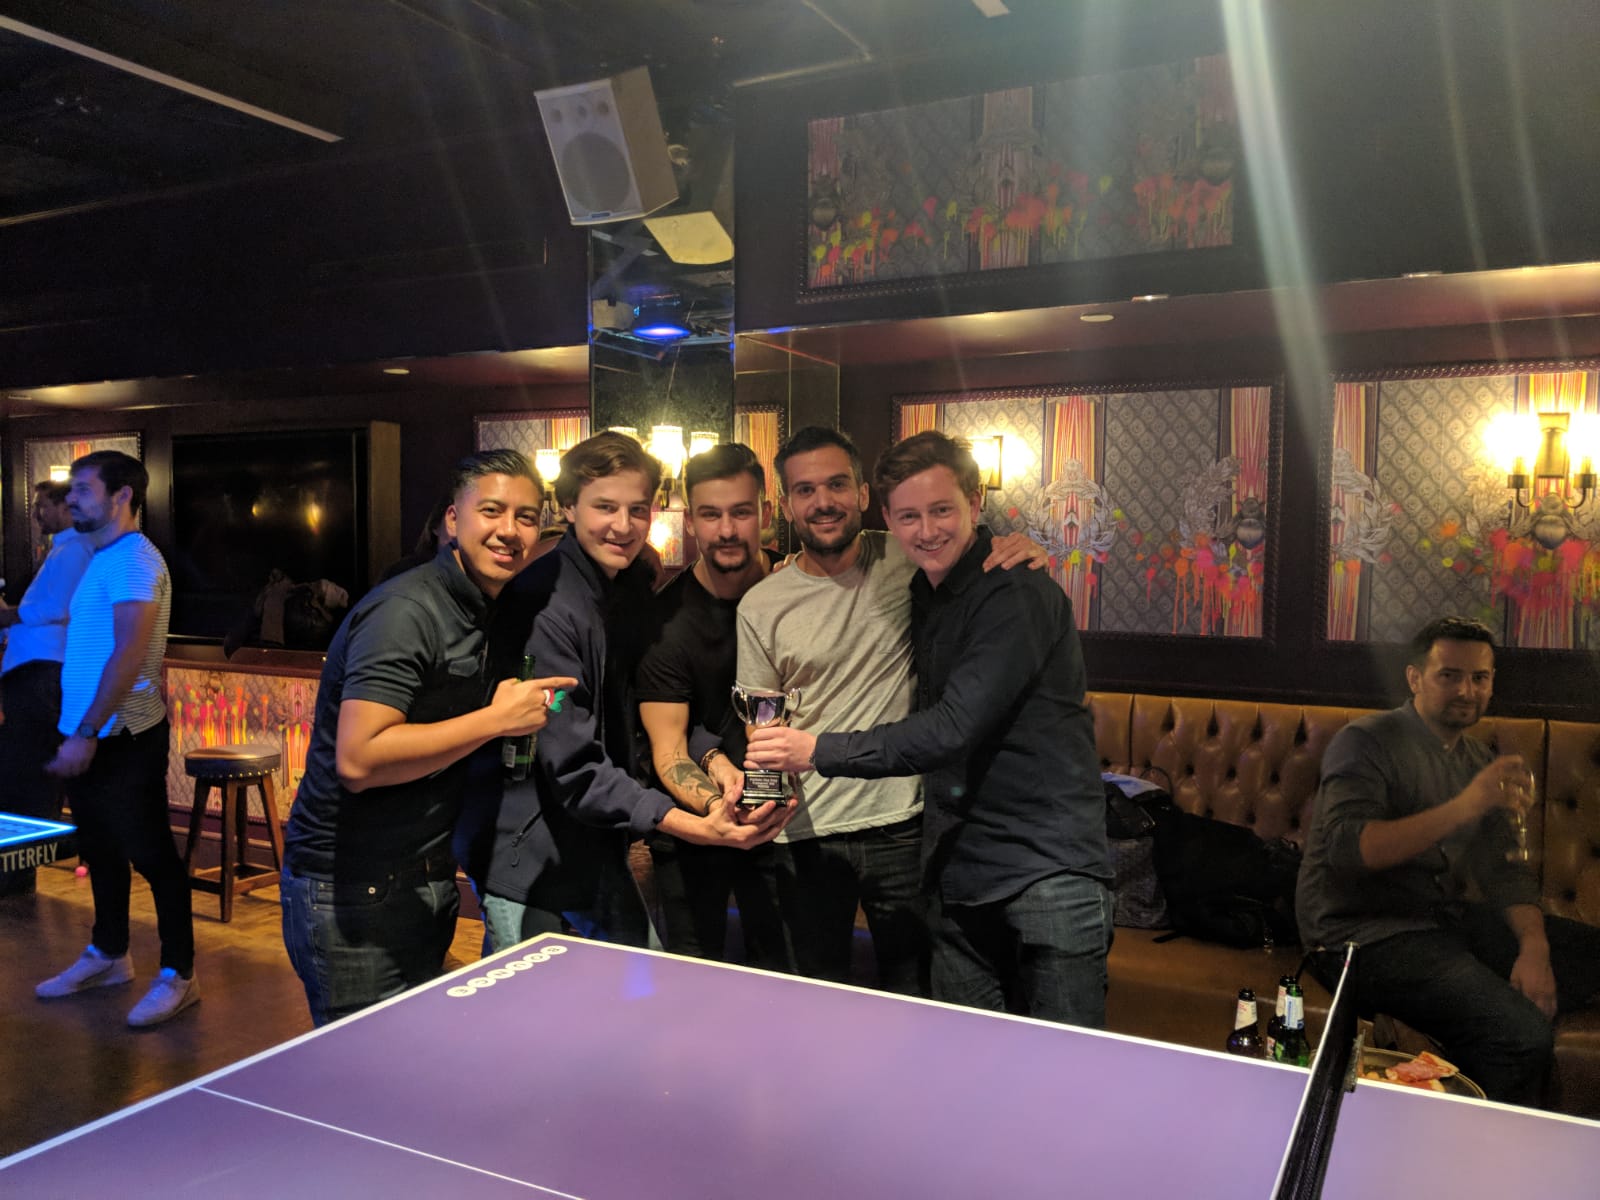 Match Report: Putting The Strong In Ping-Pong